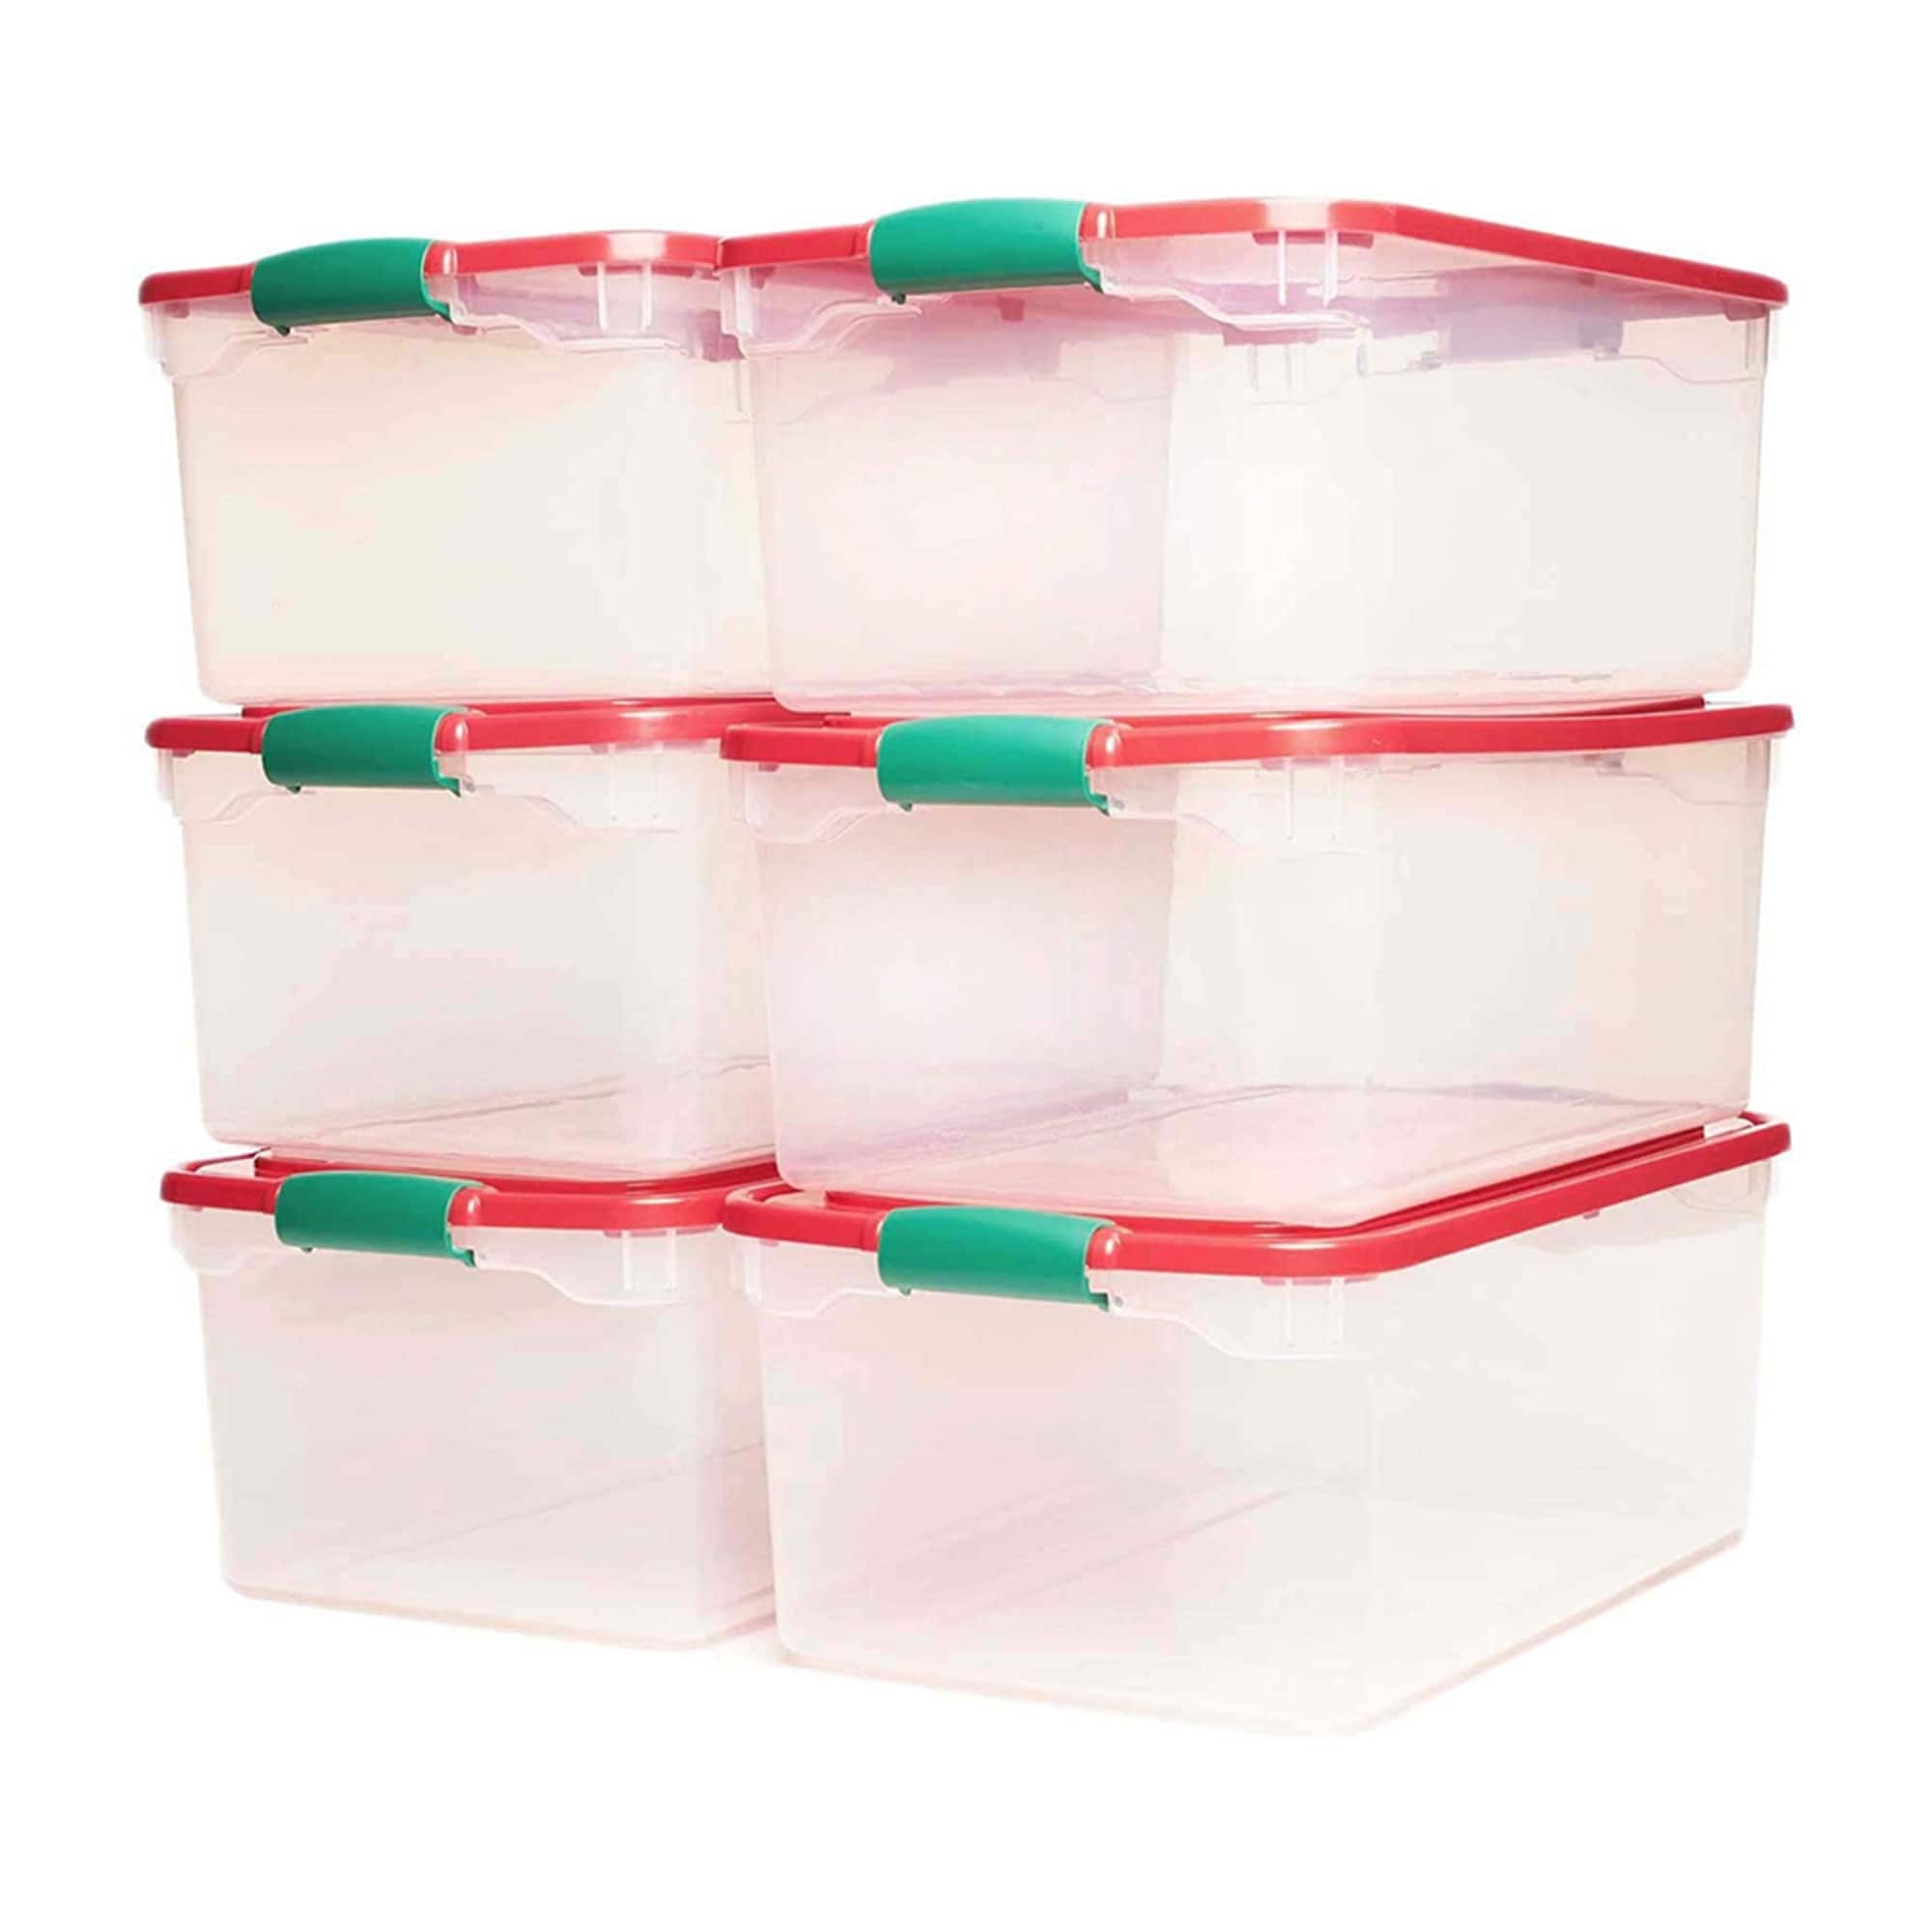 https://ak1.ostkcdn.com/images/products/is/images/direct/d18ae0f9ad685f14cfc11e394fafa5c9f902c9f0/Homz-64-Qt-Holiday-Seasonal-Decor-Plastic-Storage-Bin-with-Latching-Lid%2C-6-Pack.jpg